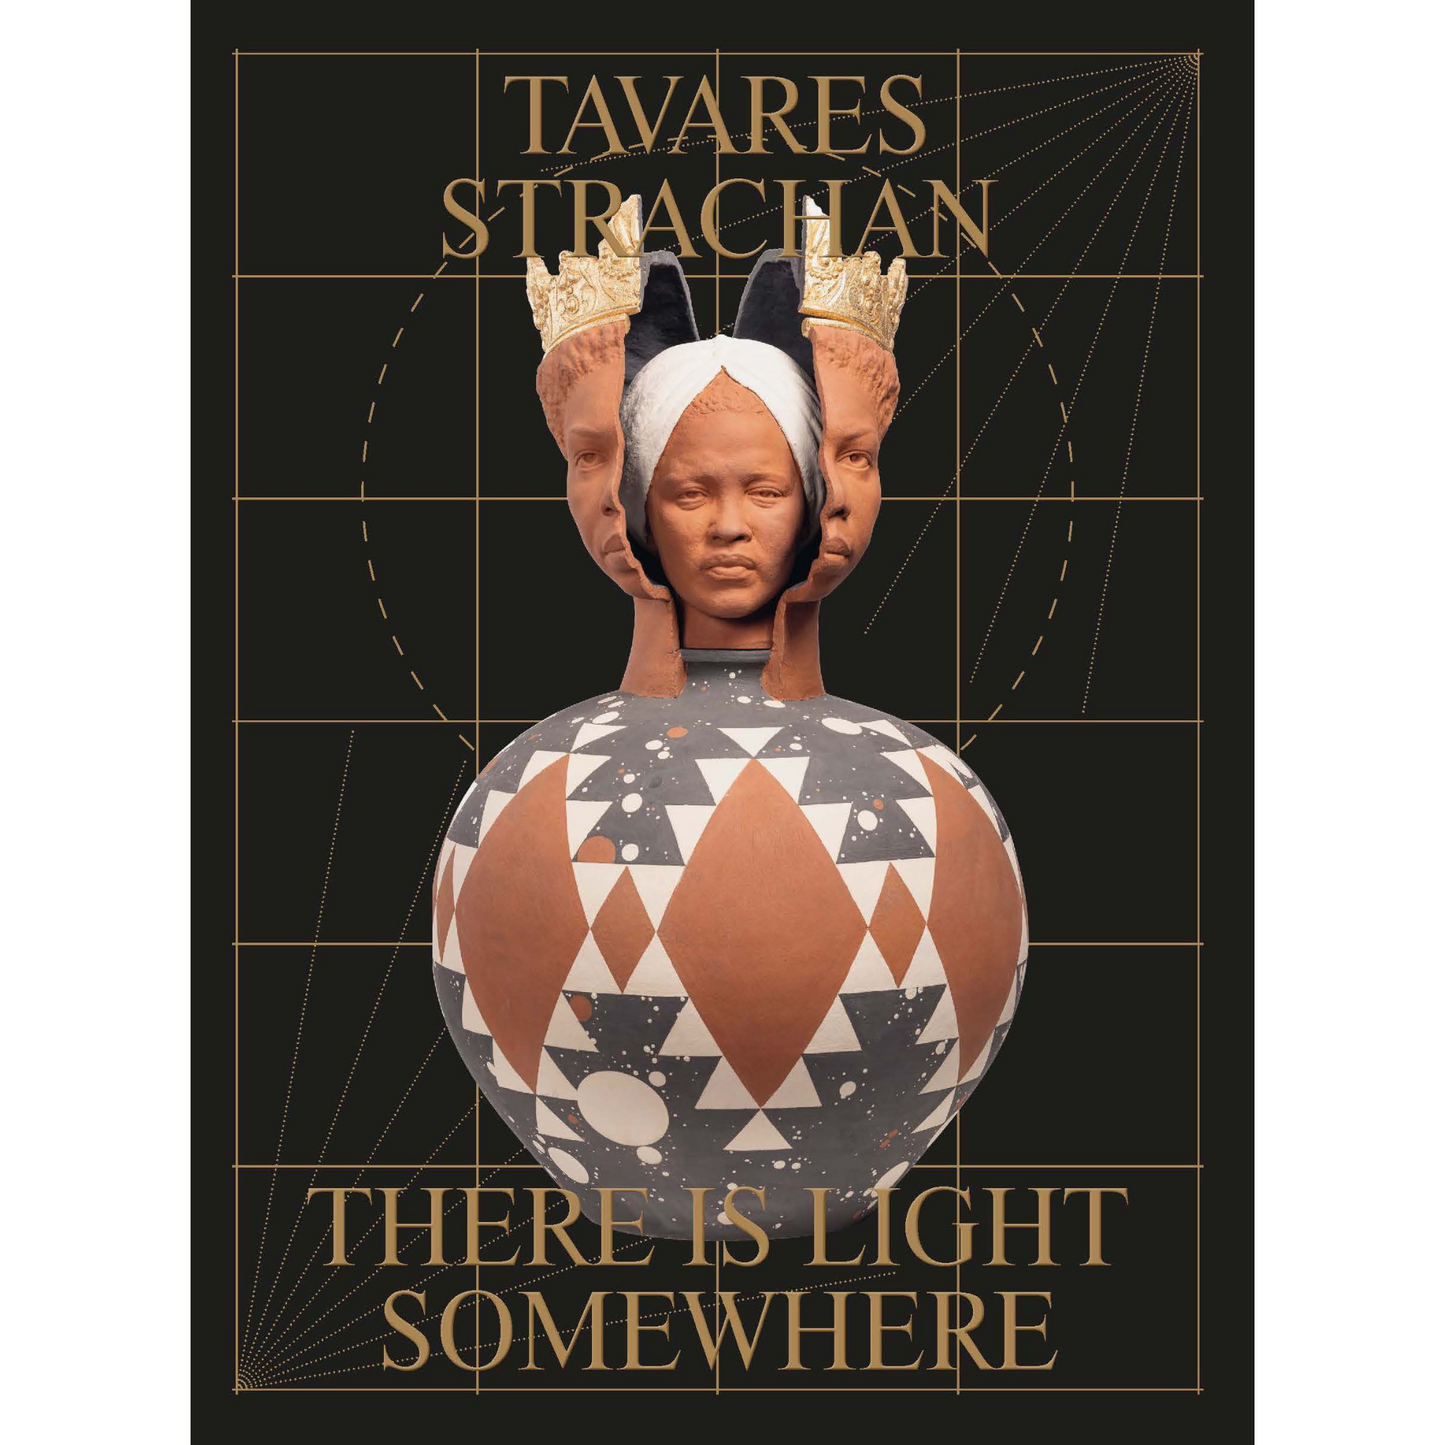 Front cover of Tavares Strachan exhibition catalogue.